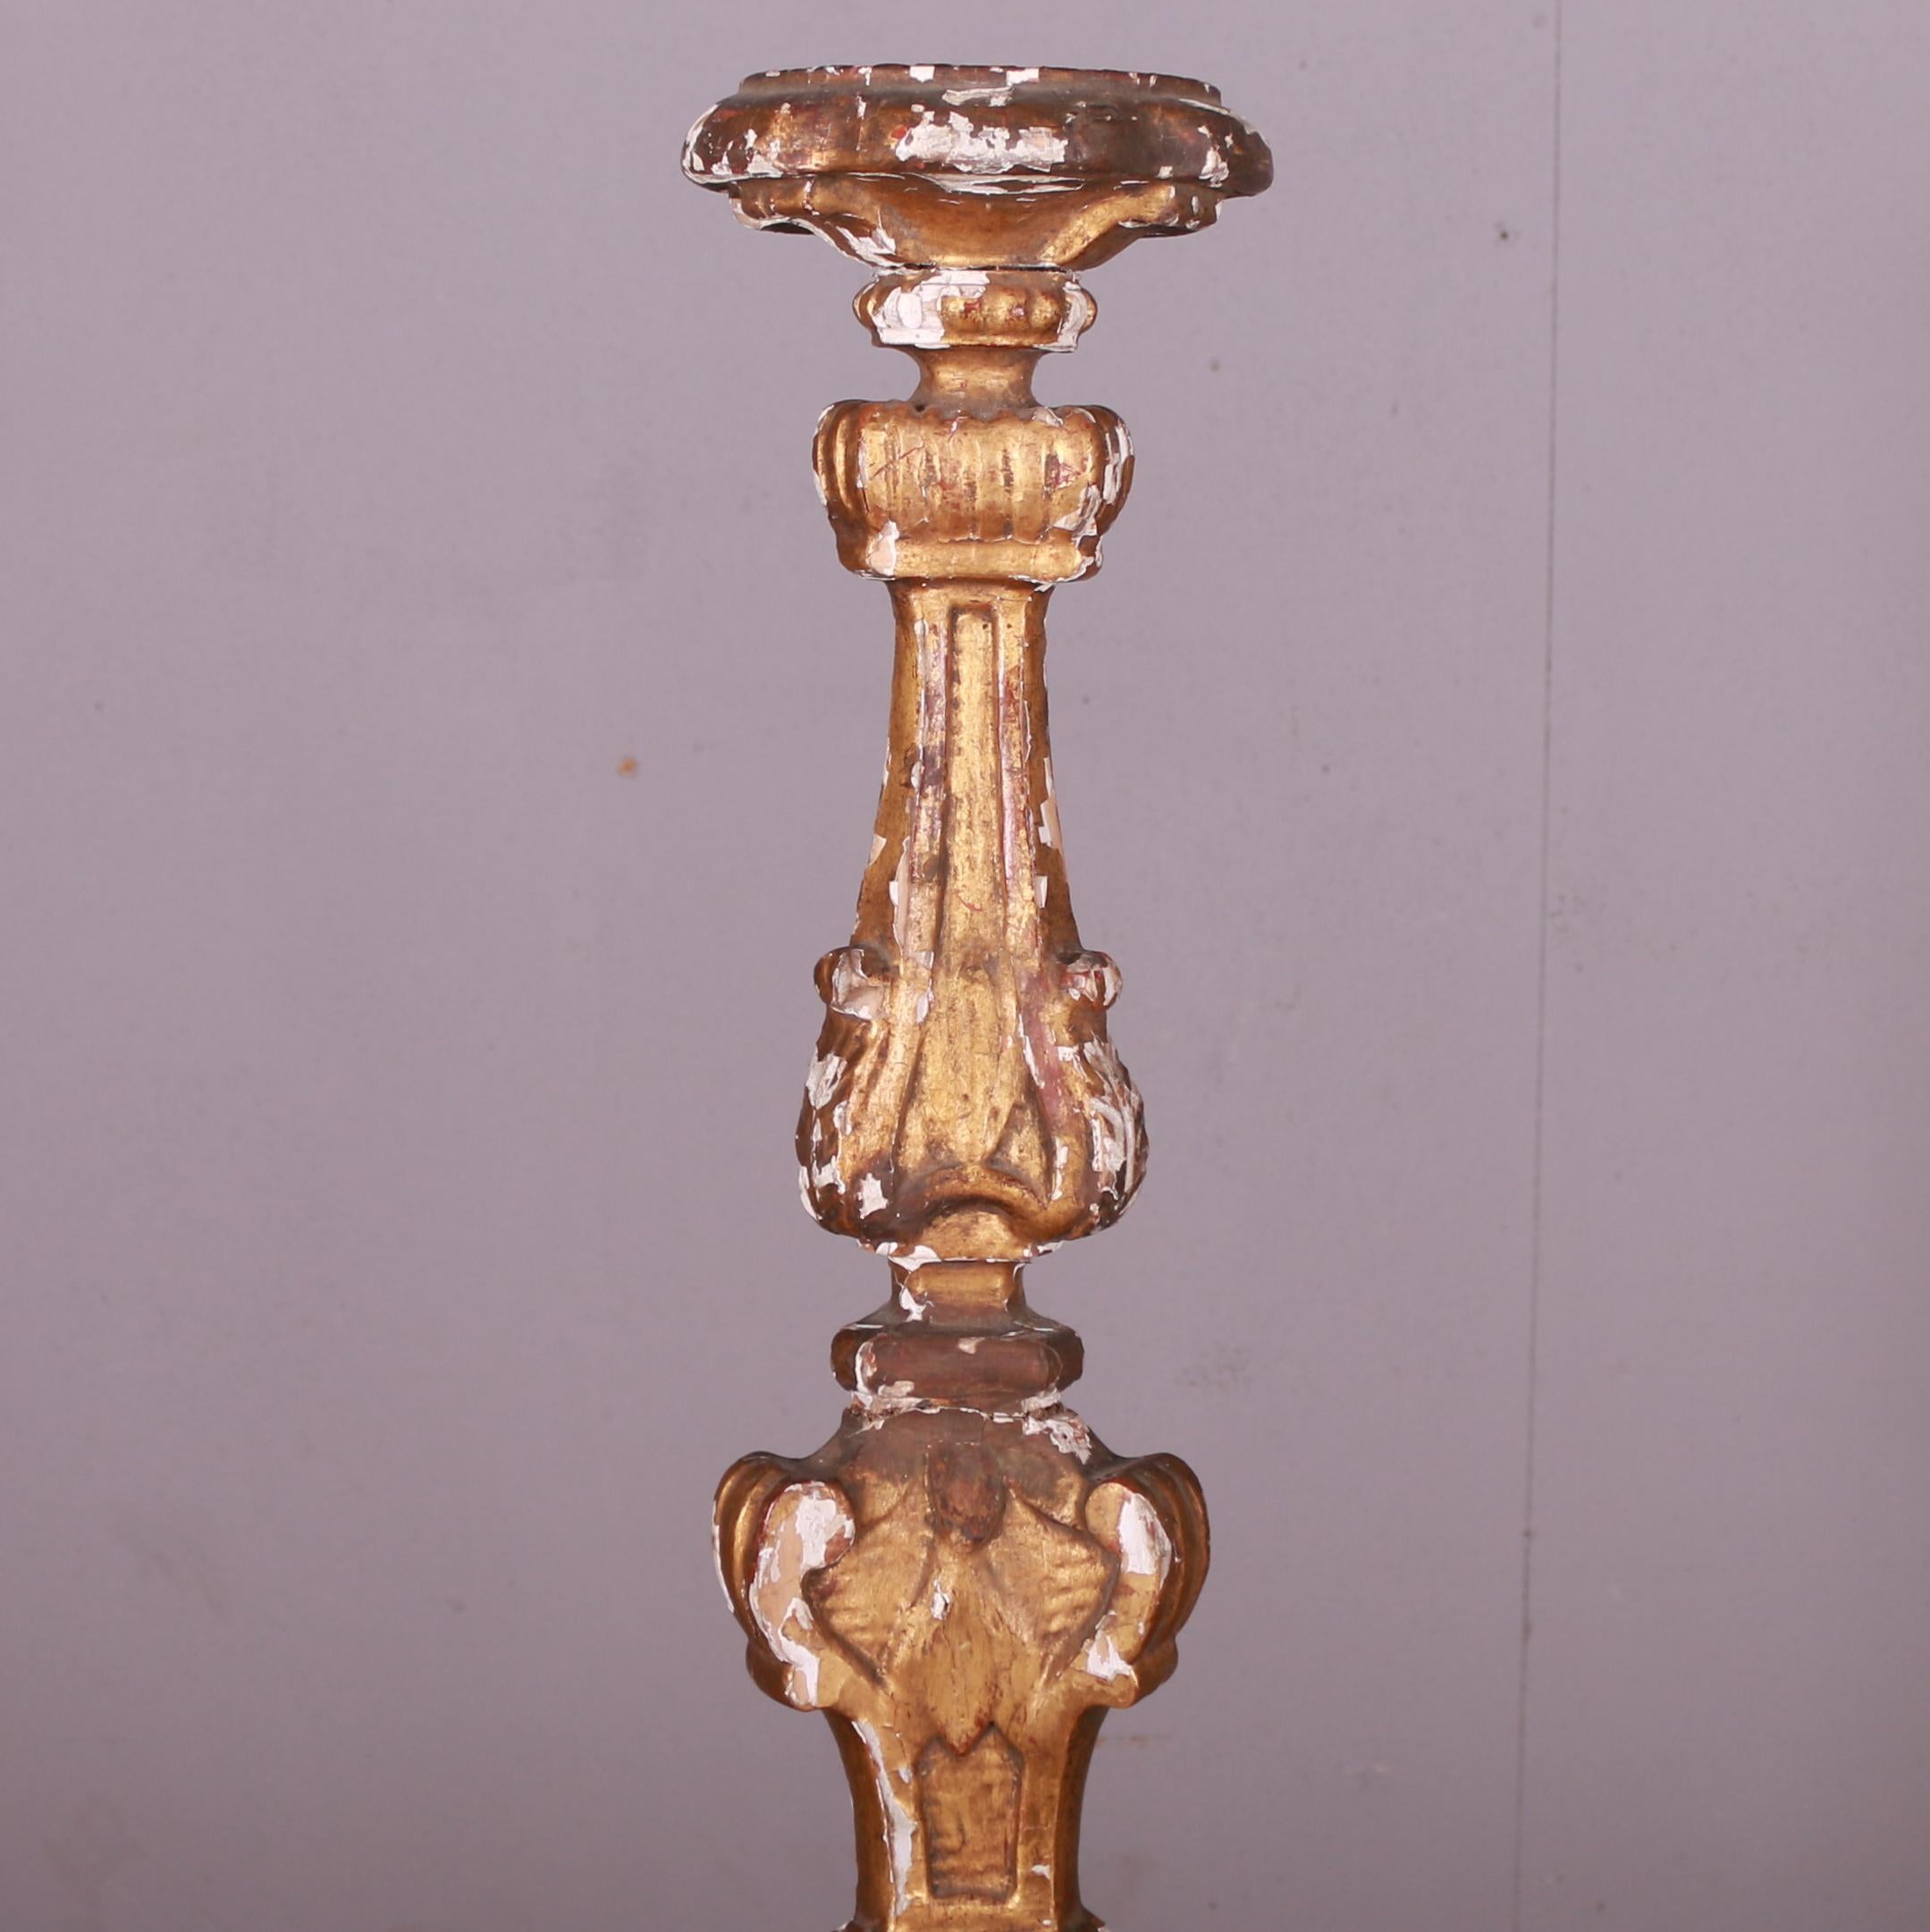 Late 19th C Italian giltwood candle holder. 1890.

Reference: 7378

Dimensions
26.5 inches (67 cms) high
7 inches (18 cms) diameter.